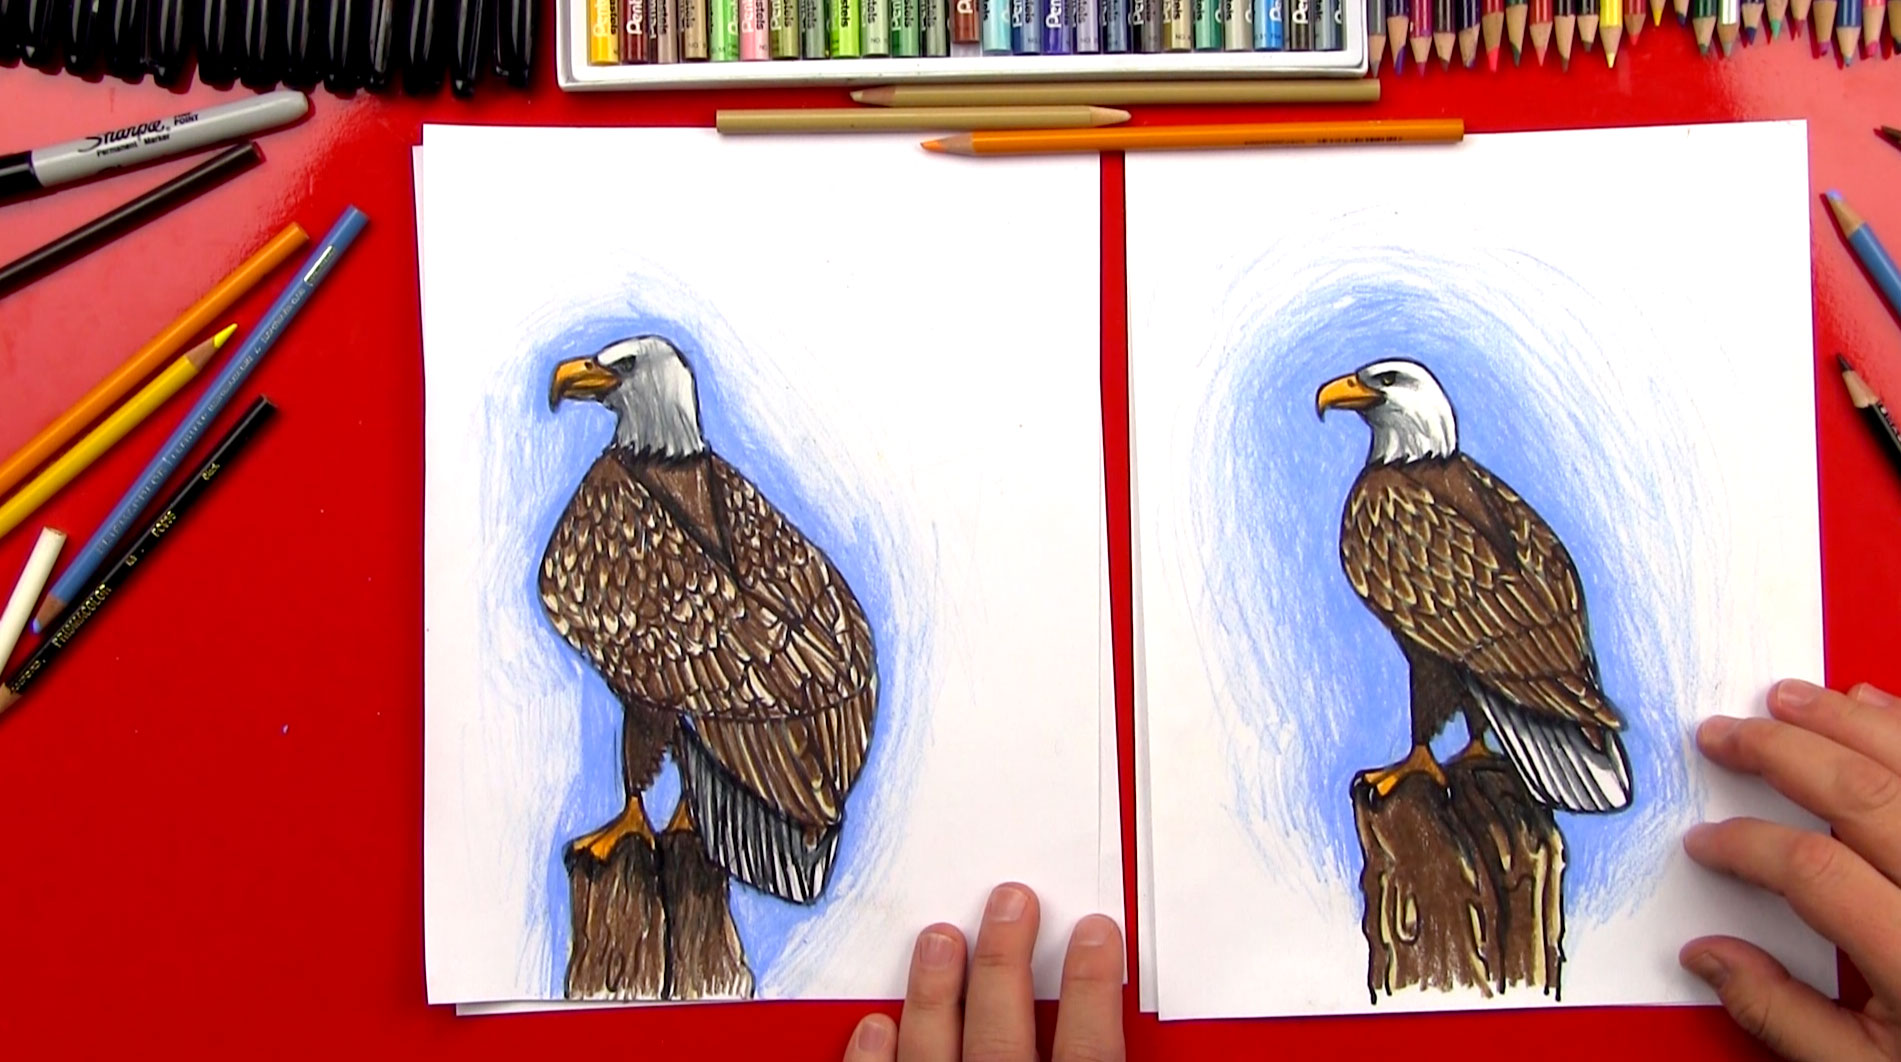 How To Draw A Realistic Bald Eagle - Art For Kids Hub